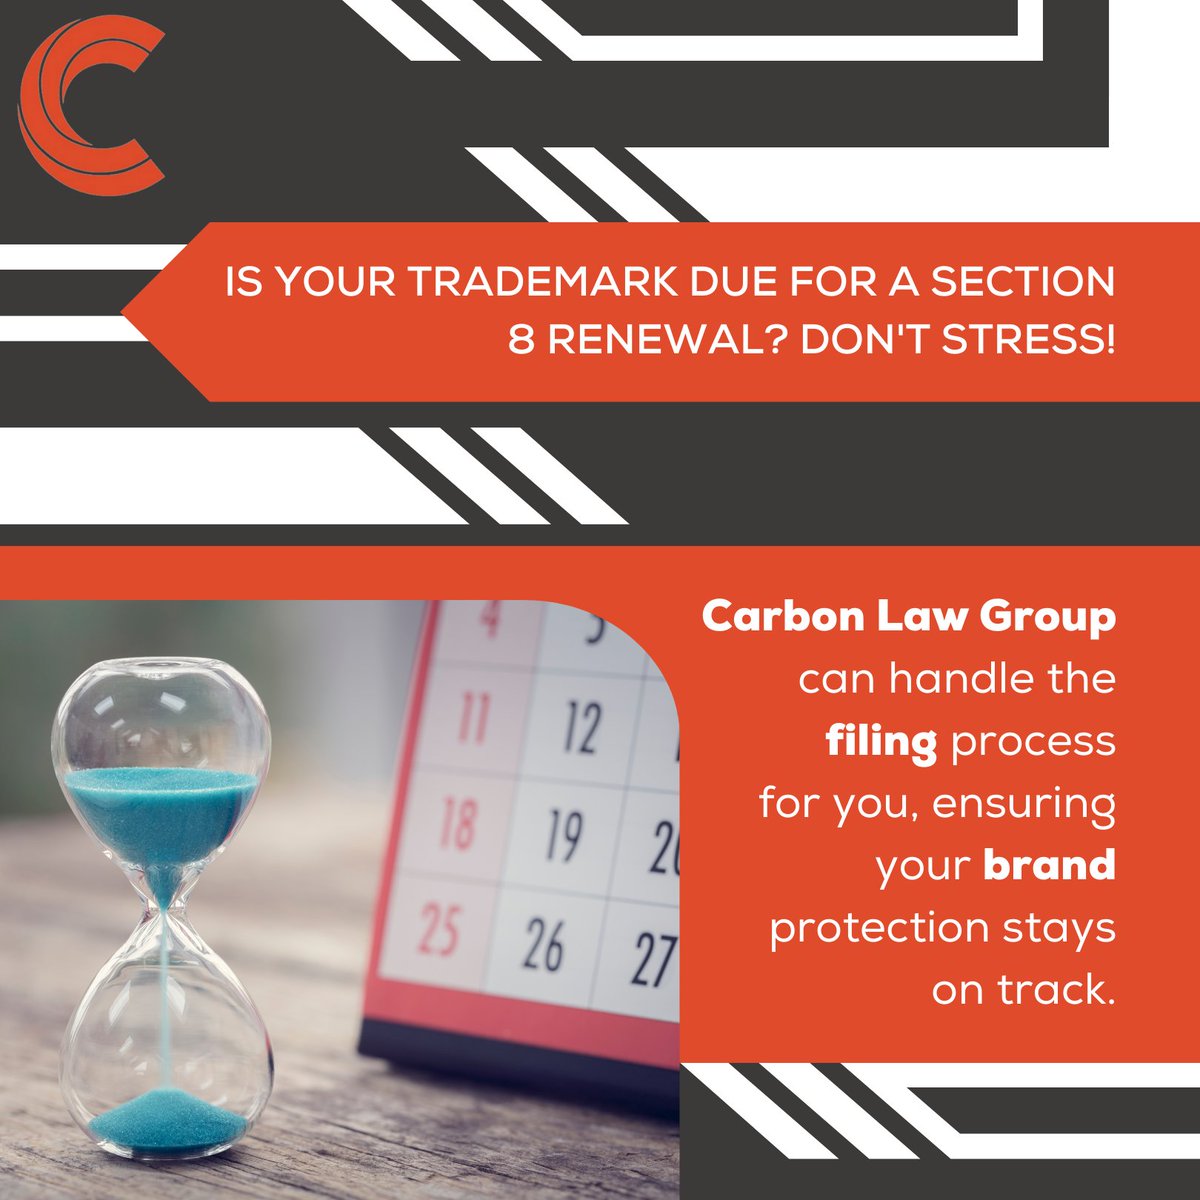 Is your trademark due for a Section 8 renewal? Don't stress! Carbon Law Group can handle the filing process for you, ensuring your brand protection stays on track.

#TrademarkRenewal #BrandProtection #CarbonLawGroup